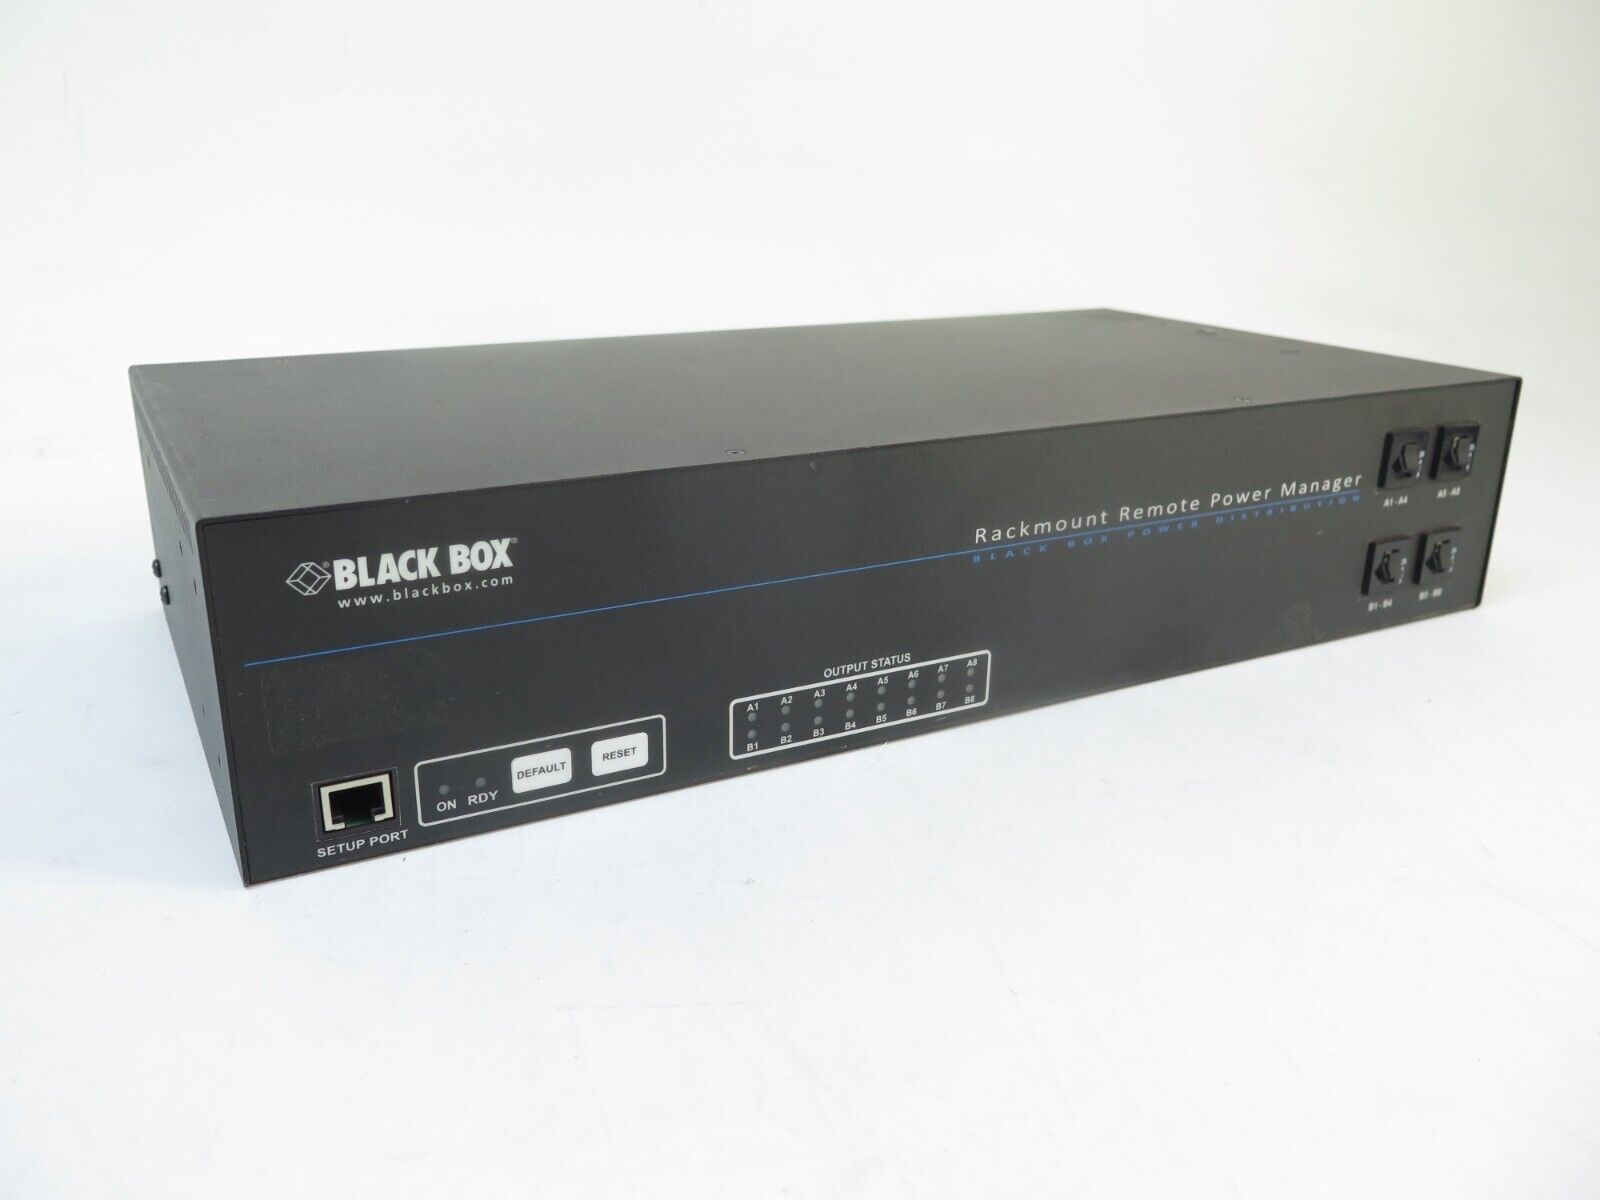 Black Box PS569A-R2 - 16-Outlet Rackmount Remote Power Manager